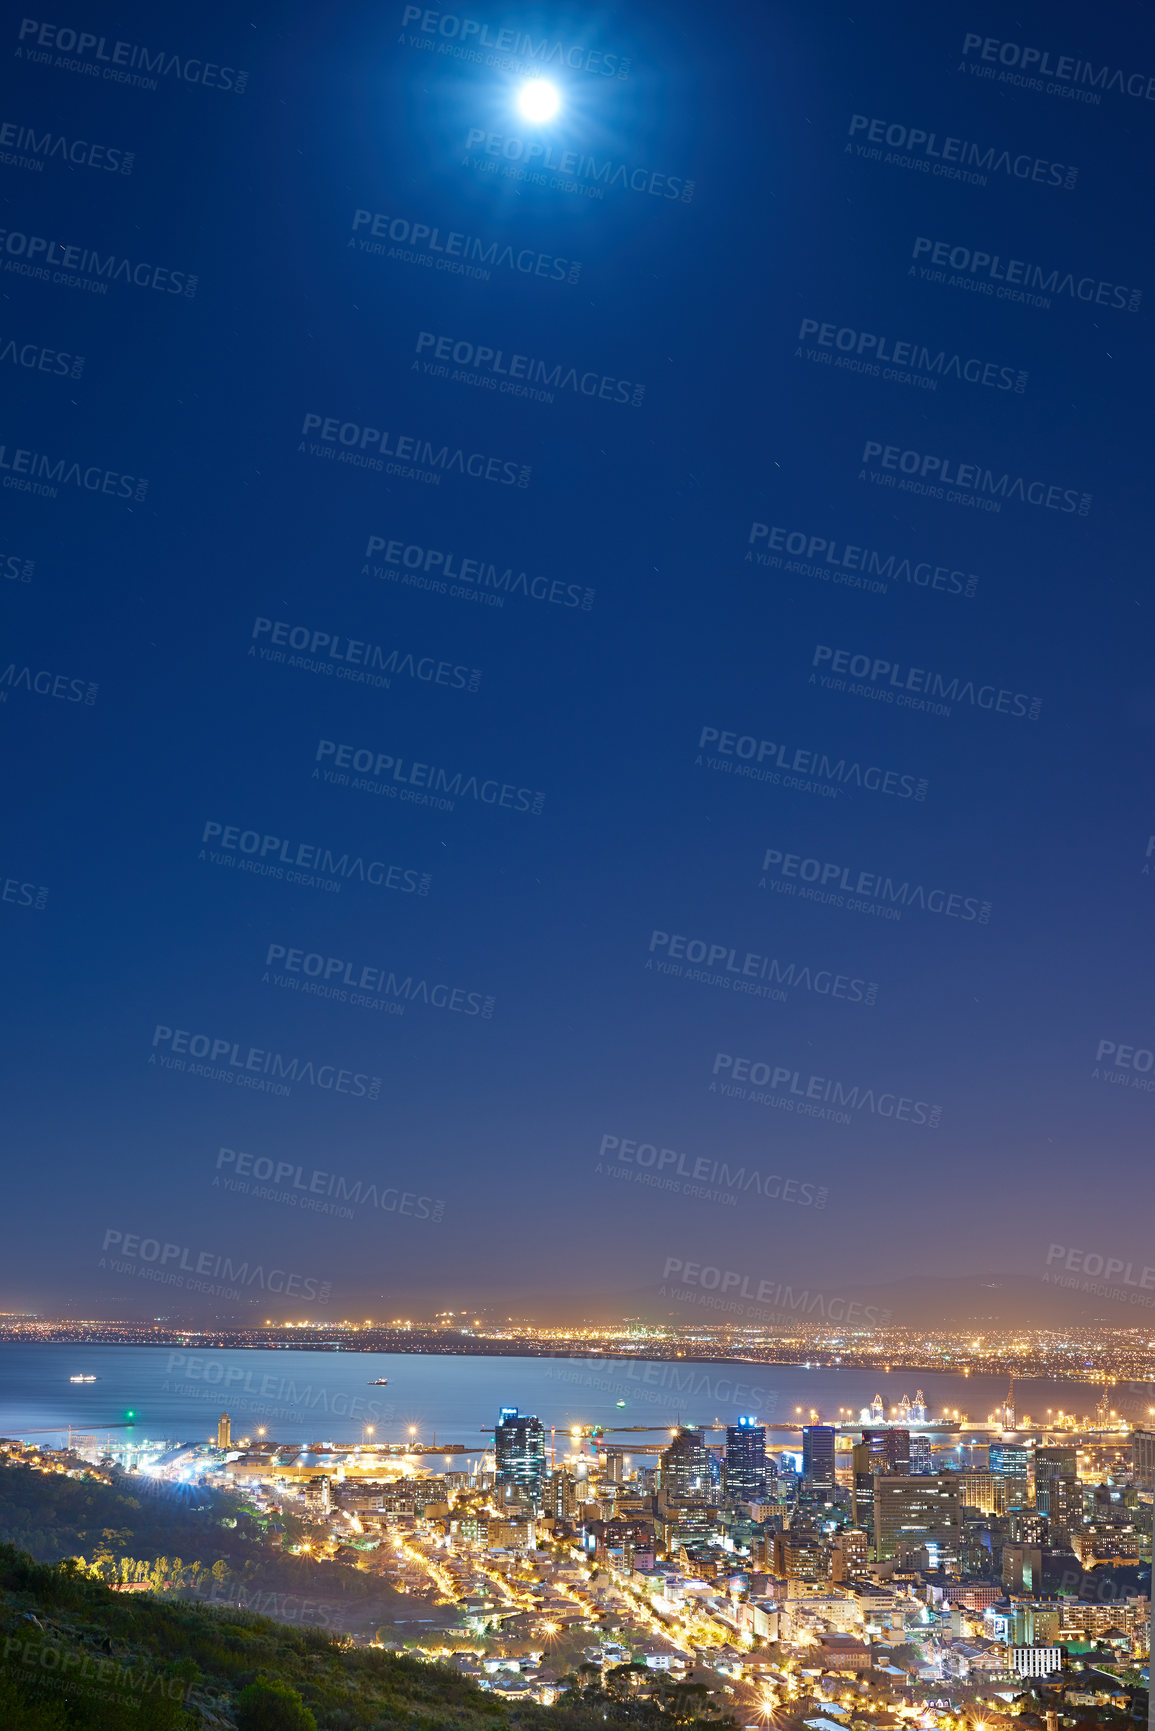 Buy stock photo Urban city lights with a full moon in the midnight sky with copy space. Skyline with colorful lighting with the wide open ocean on the horizon. City buildings at night in Signal Hill, South Africa